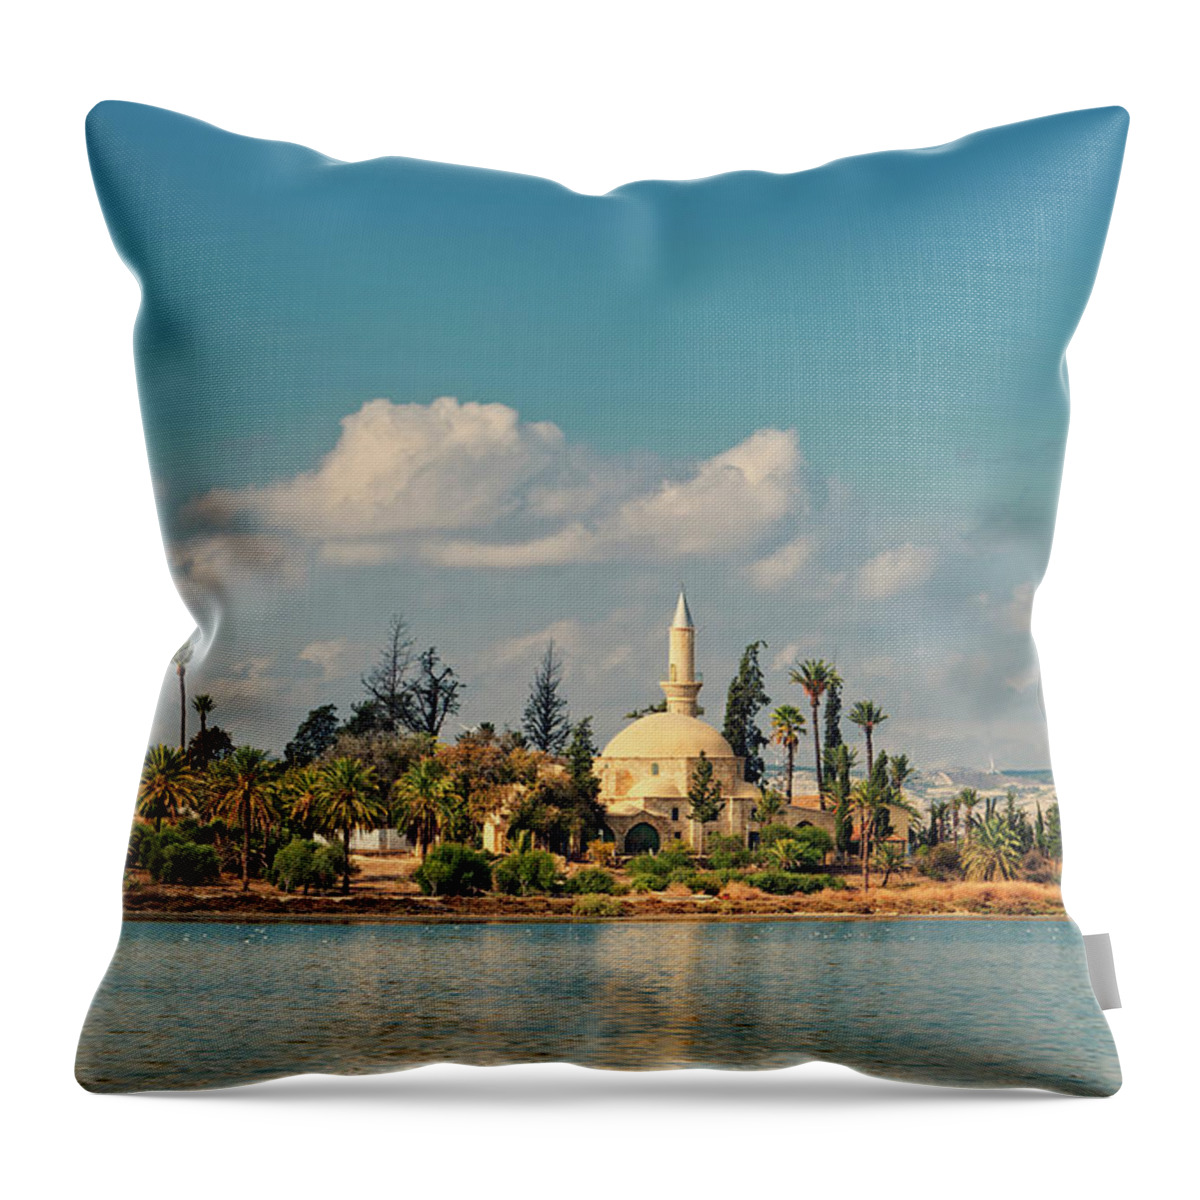 Tranquility Throw Pillow featuring the photograph Hala Sultan Tekke Mosque by © Allard Schager